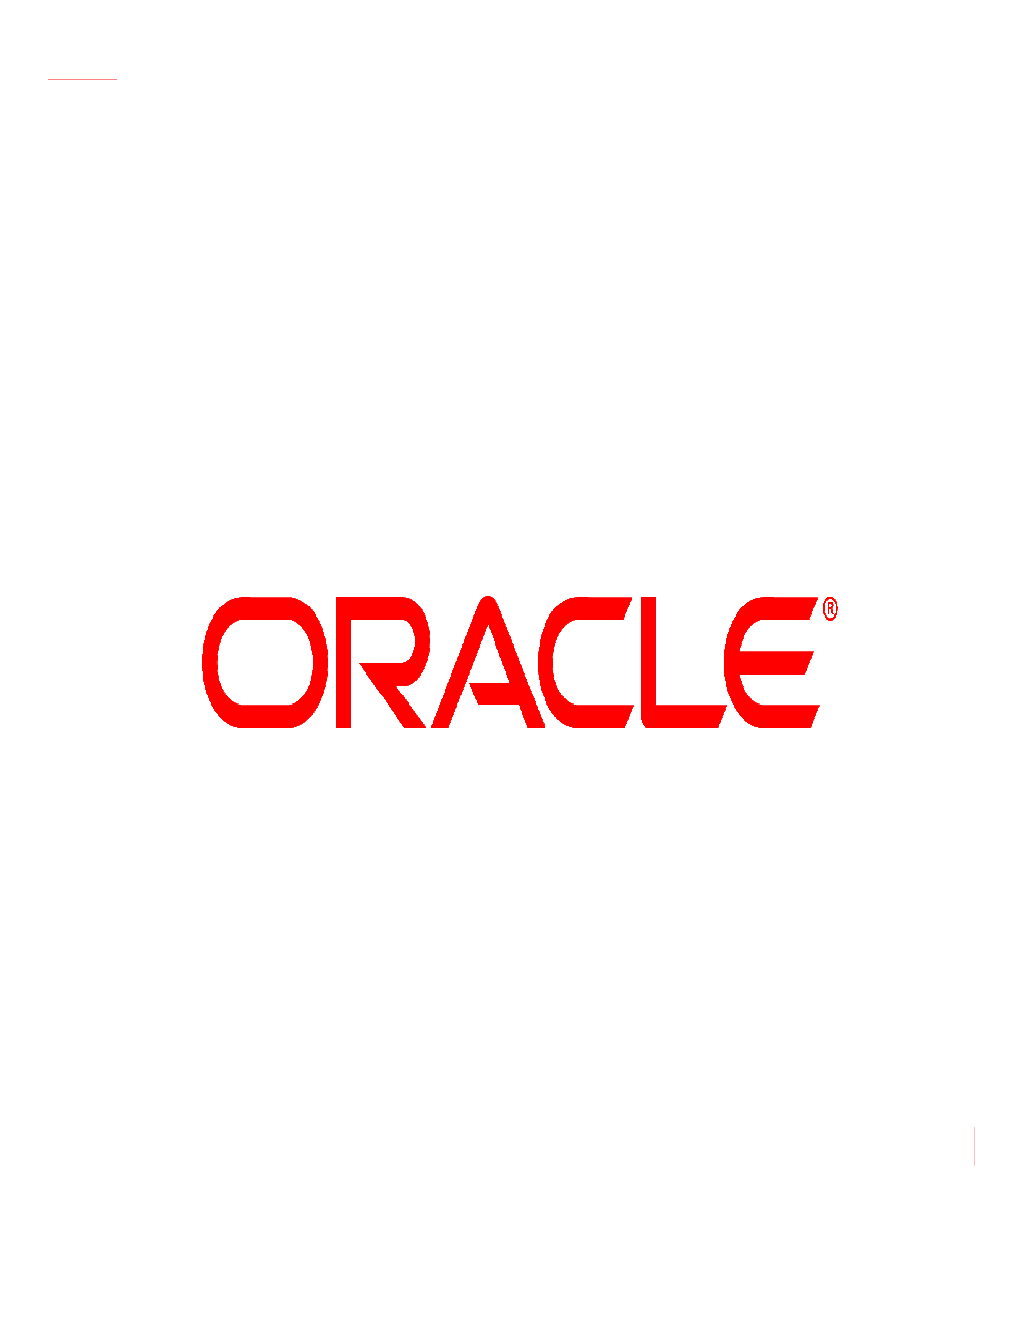 © 2008 Oracle Corporation